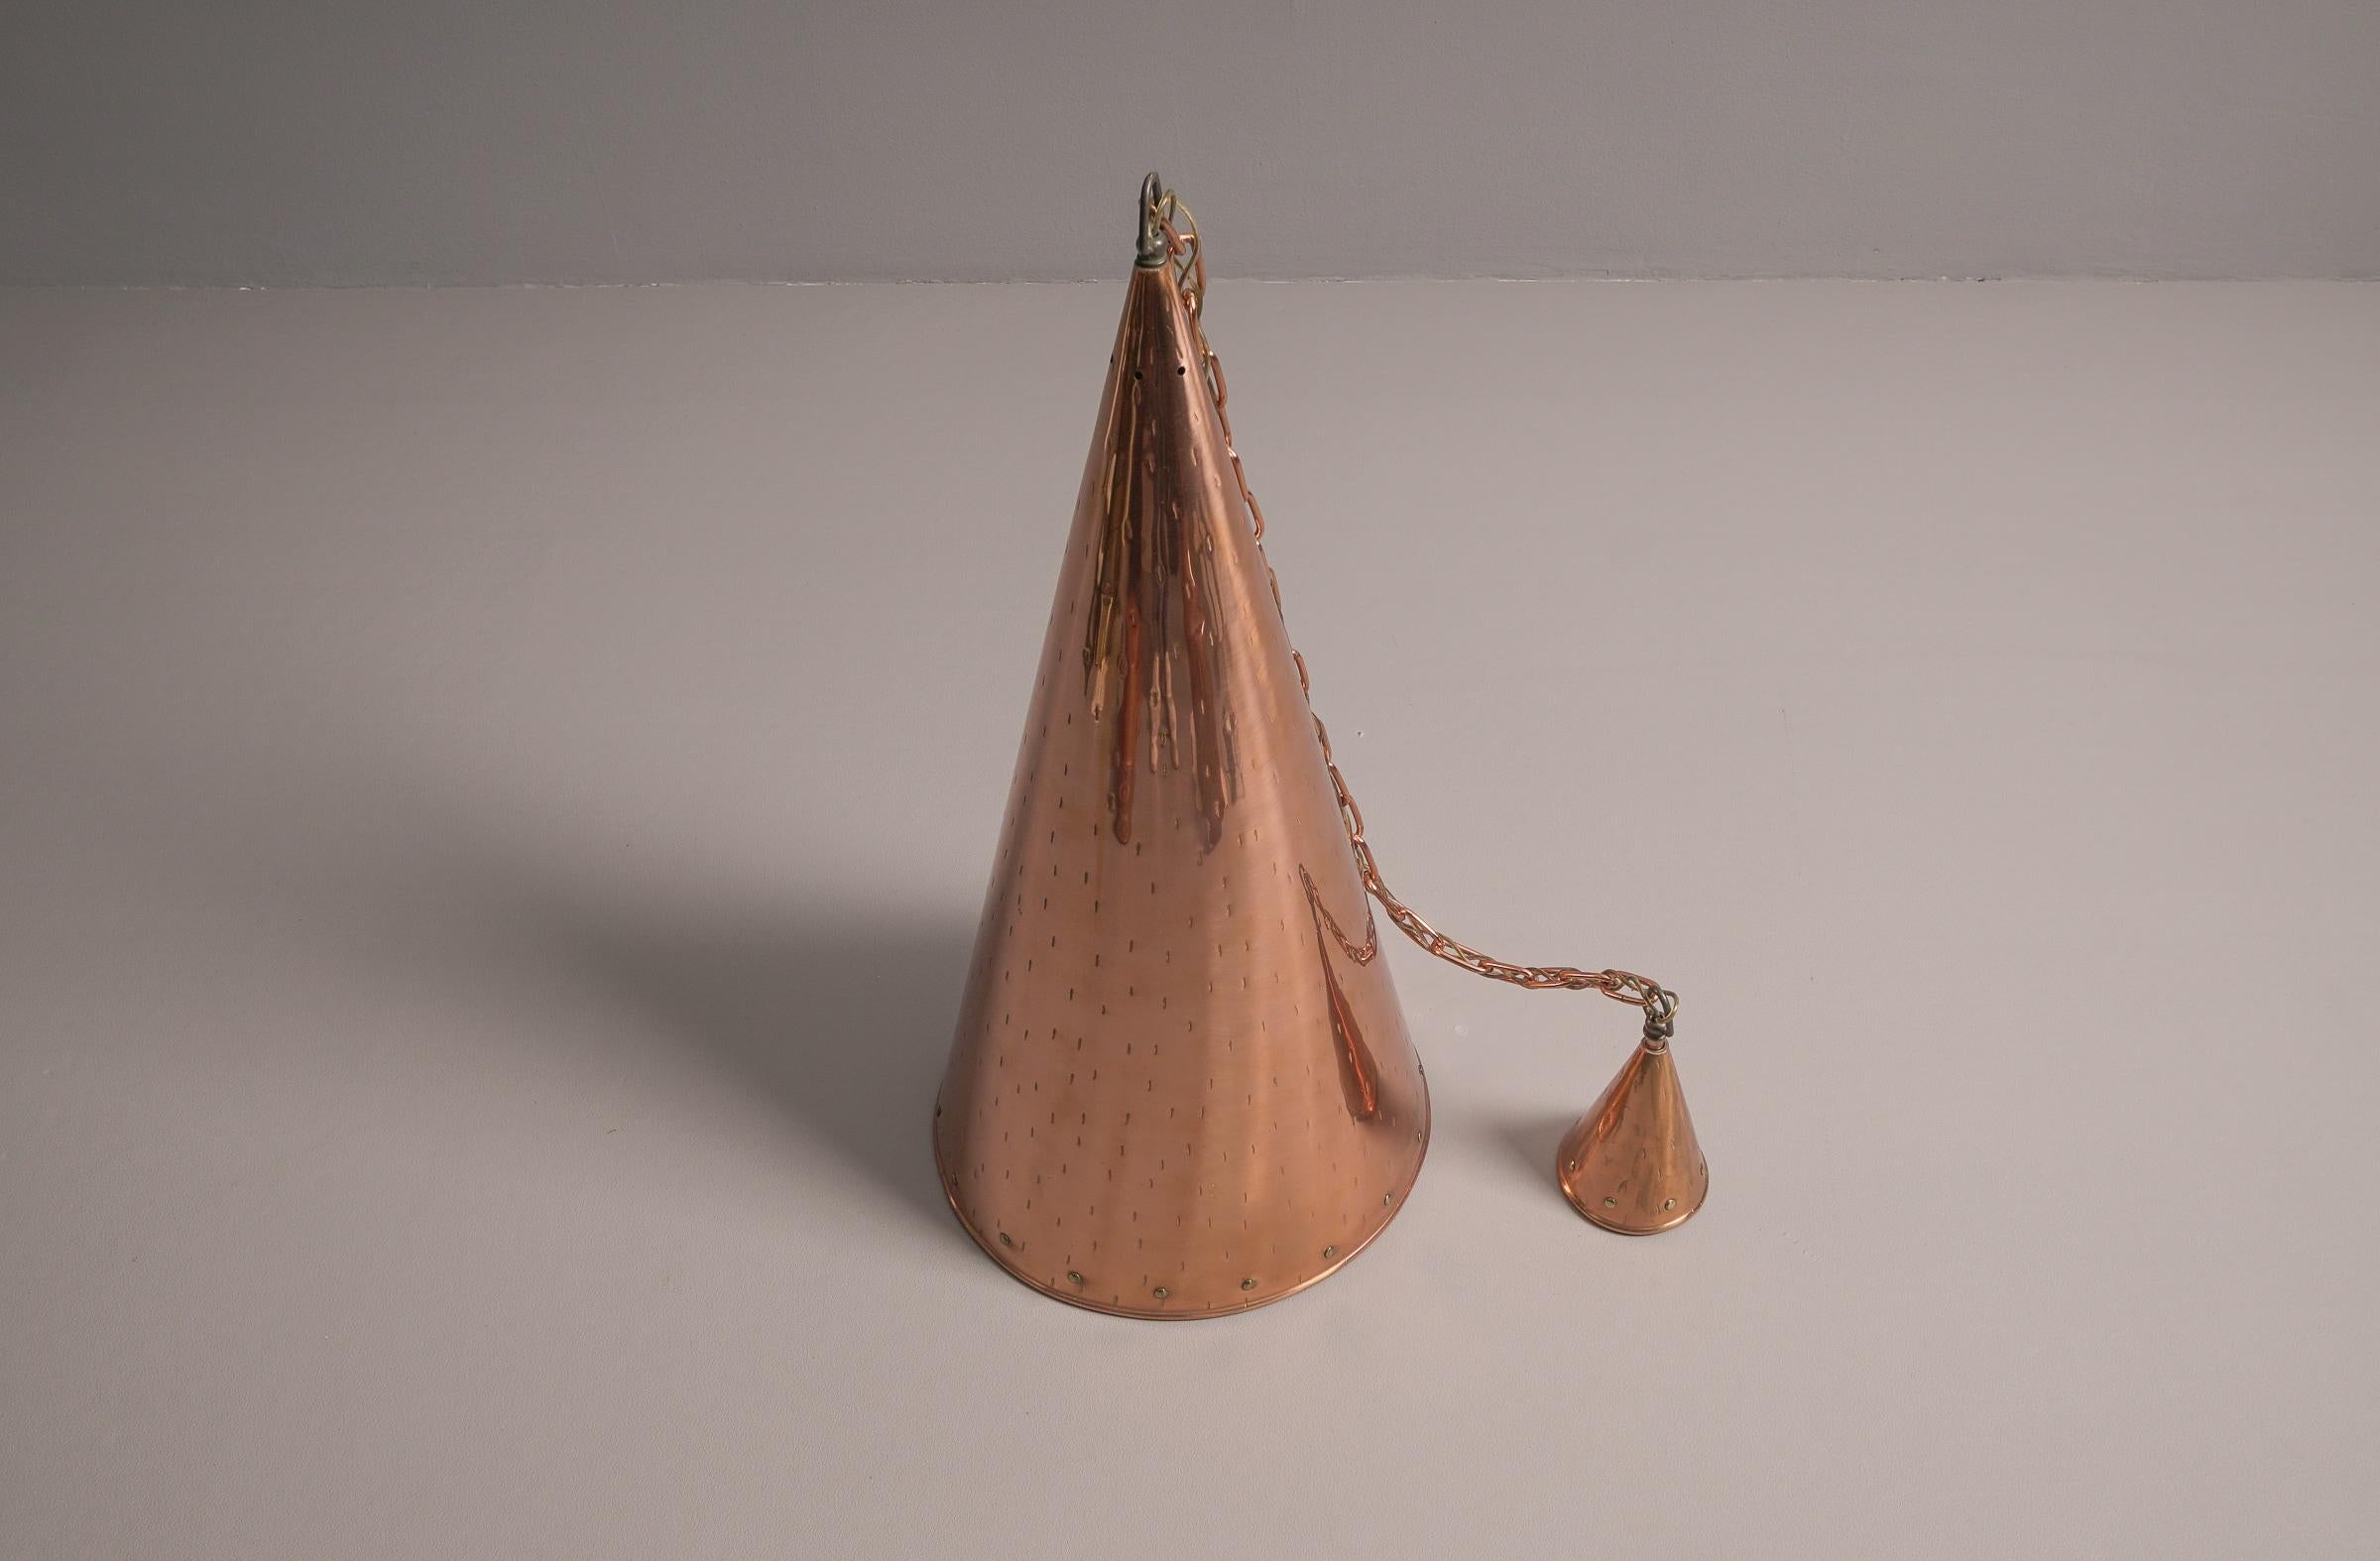 Danish Hammered Copper Cone Pendant Lamps by E.S Horn Aalestrup, 1950s Denmark For Sale